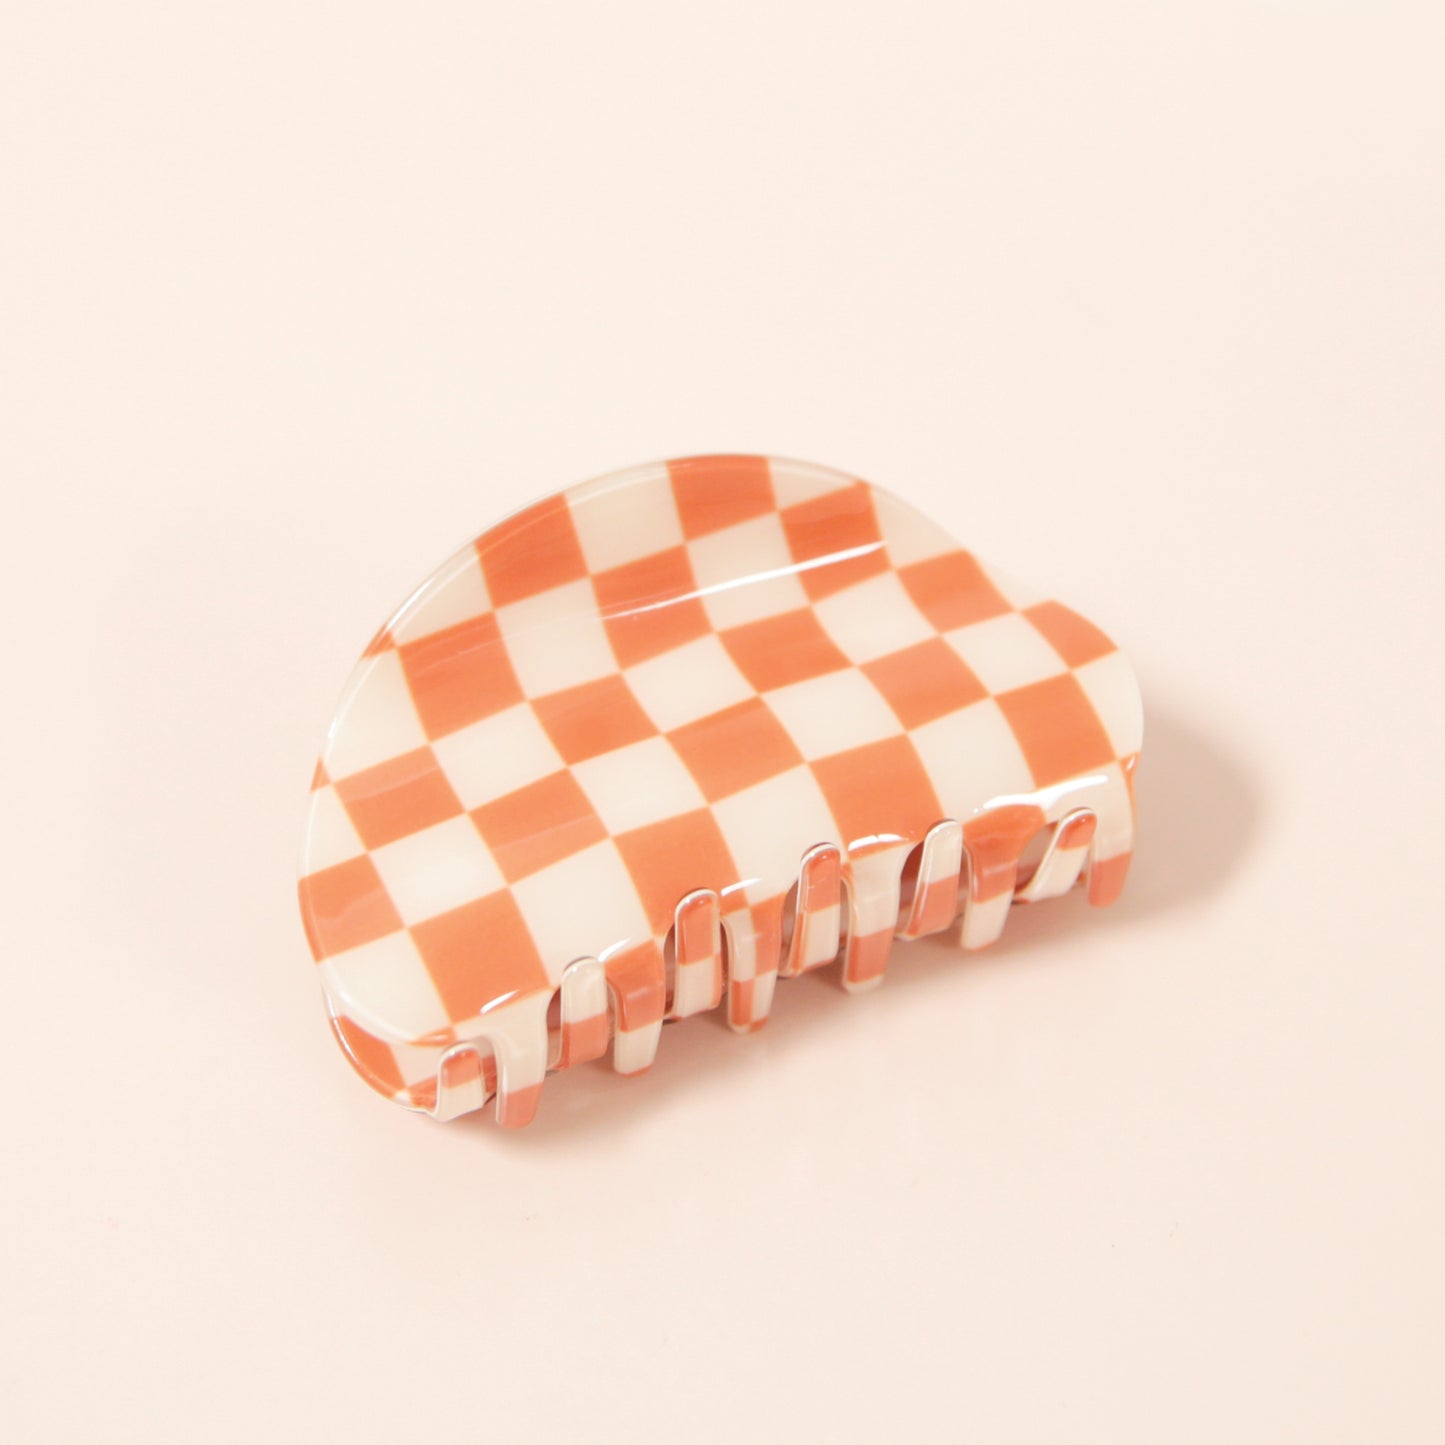 An orange and white claw clip with a rounded edge detail.